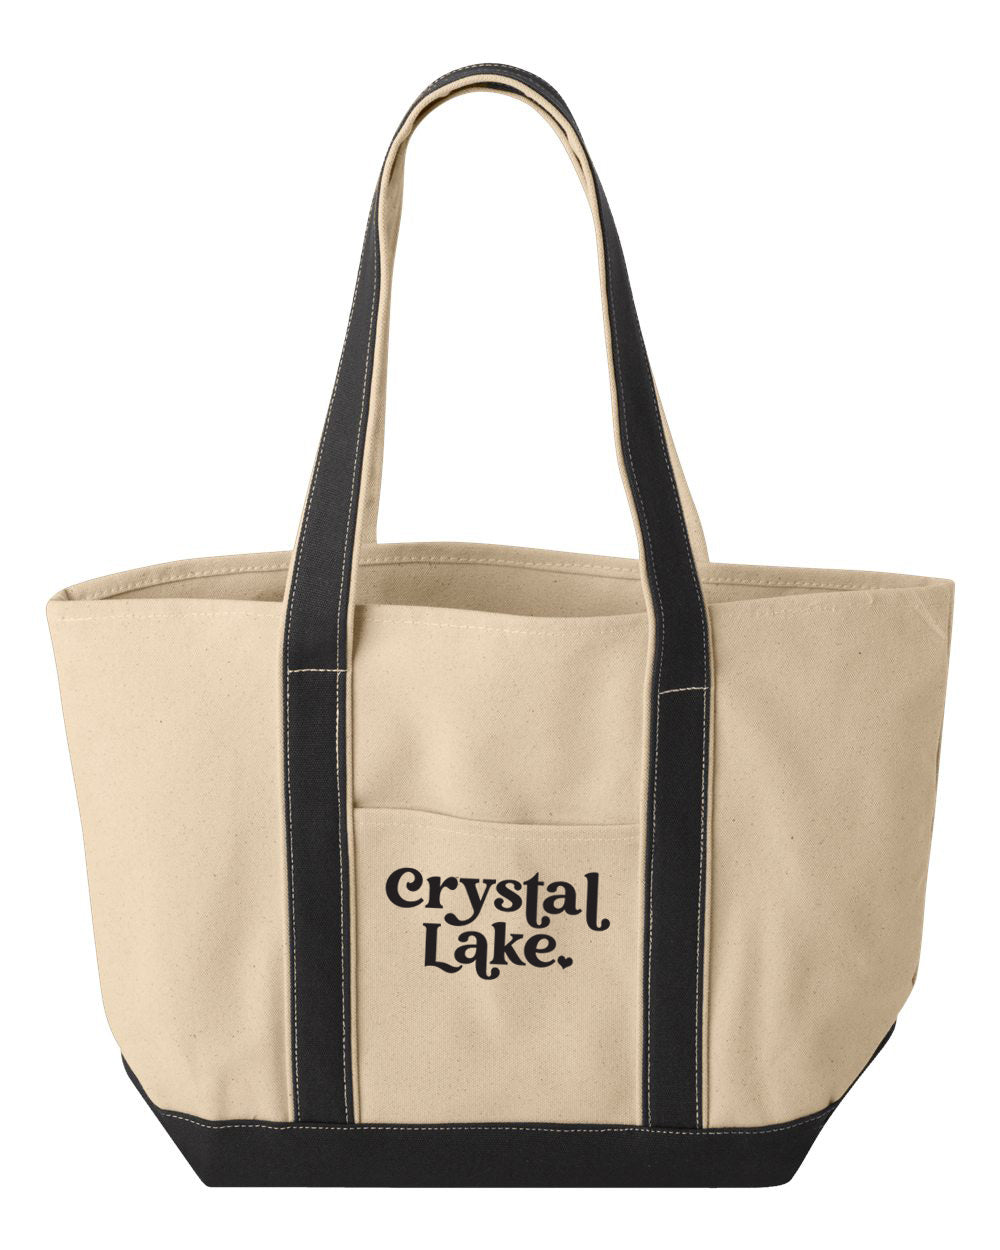 IN STOCK NOW! - Lake Life Crystal Lake Heart Large Boat Tote - natural/black